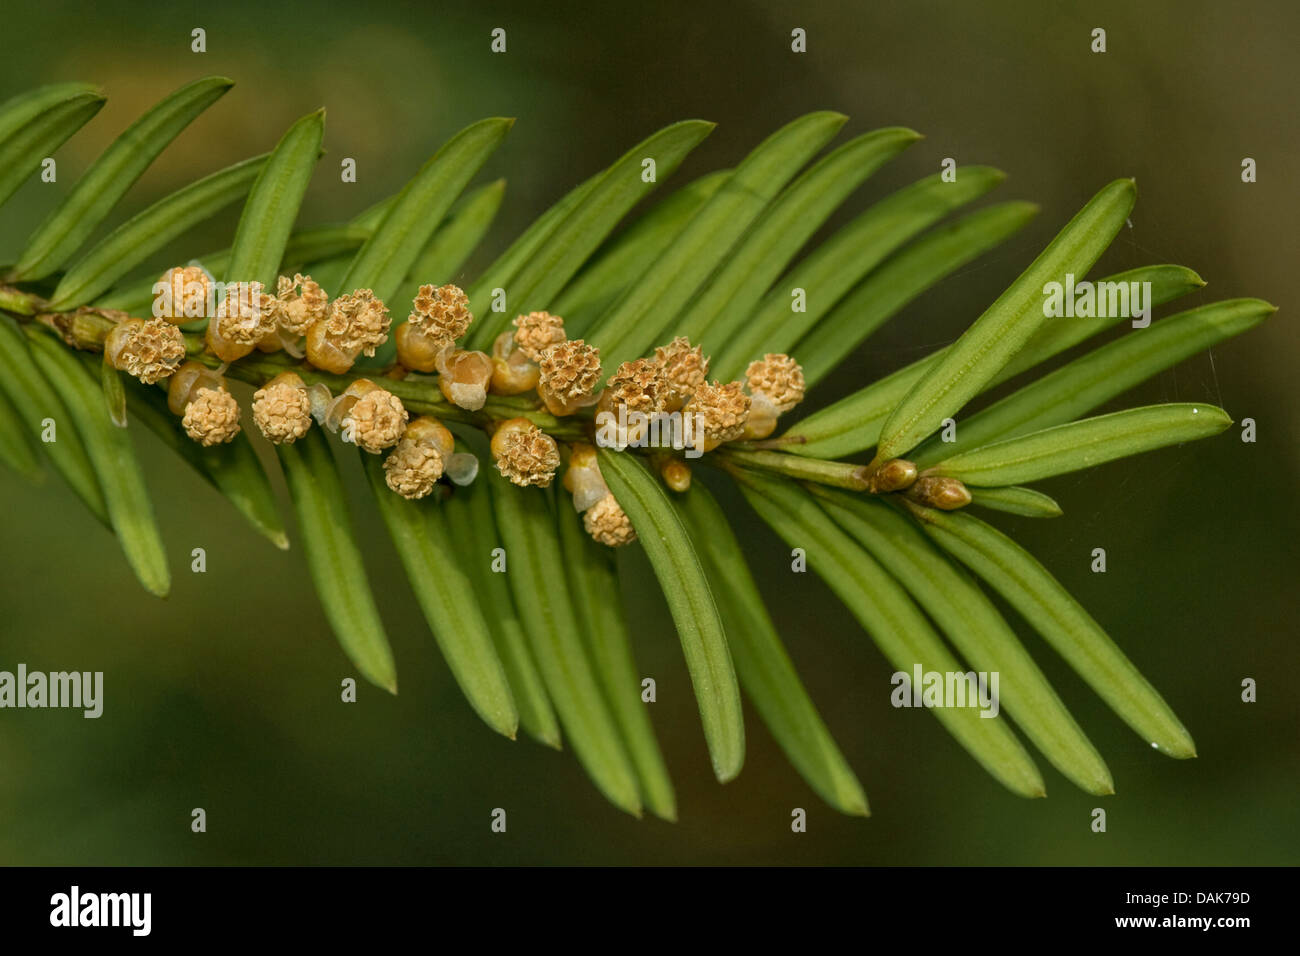 common yew (Taxus baccata), branch with male flowers, Germany Stock Photo